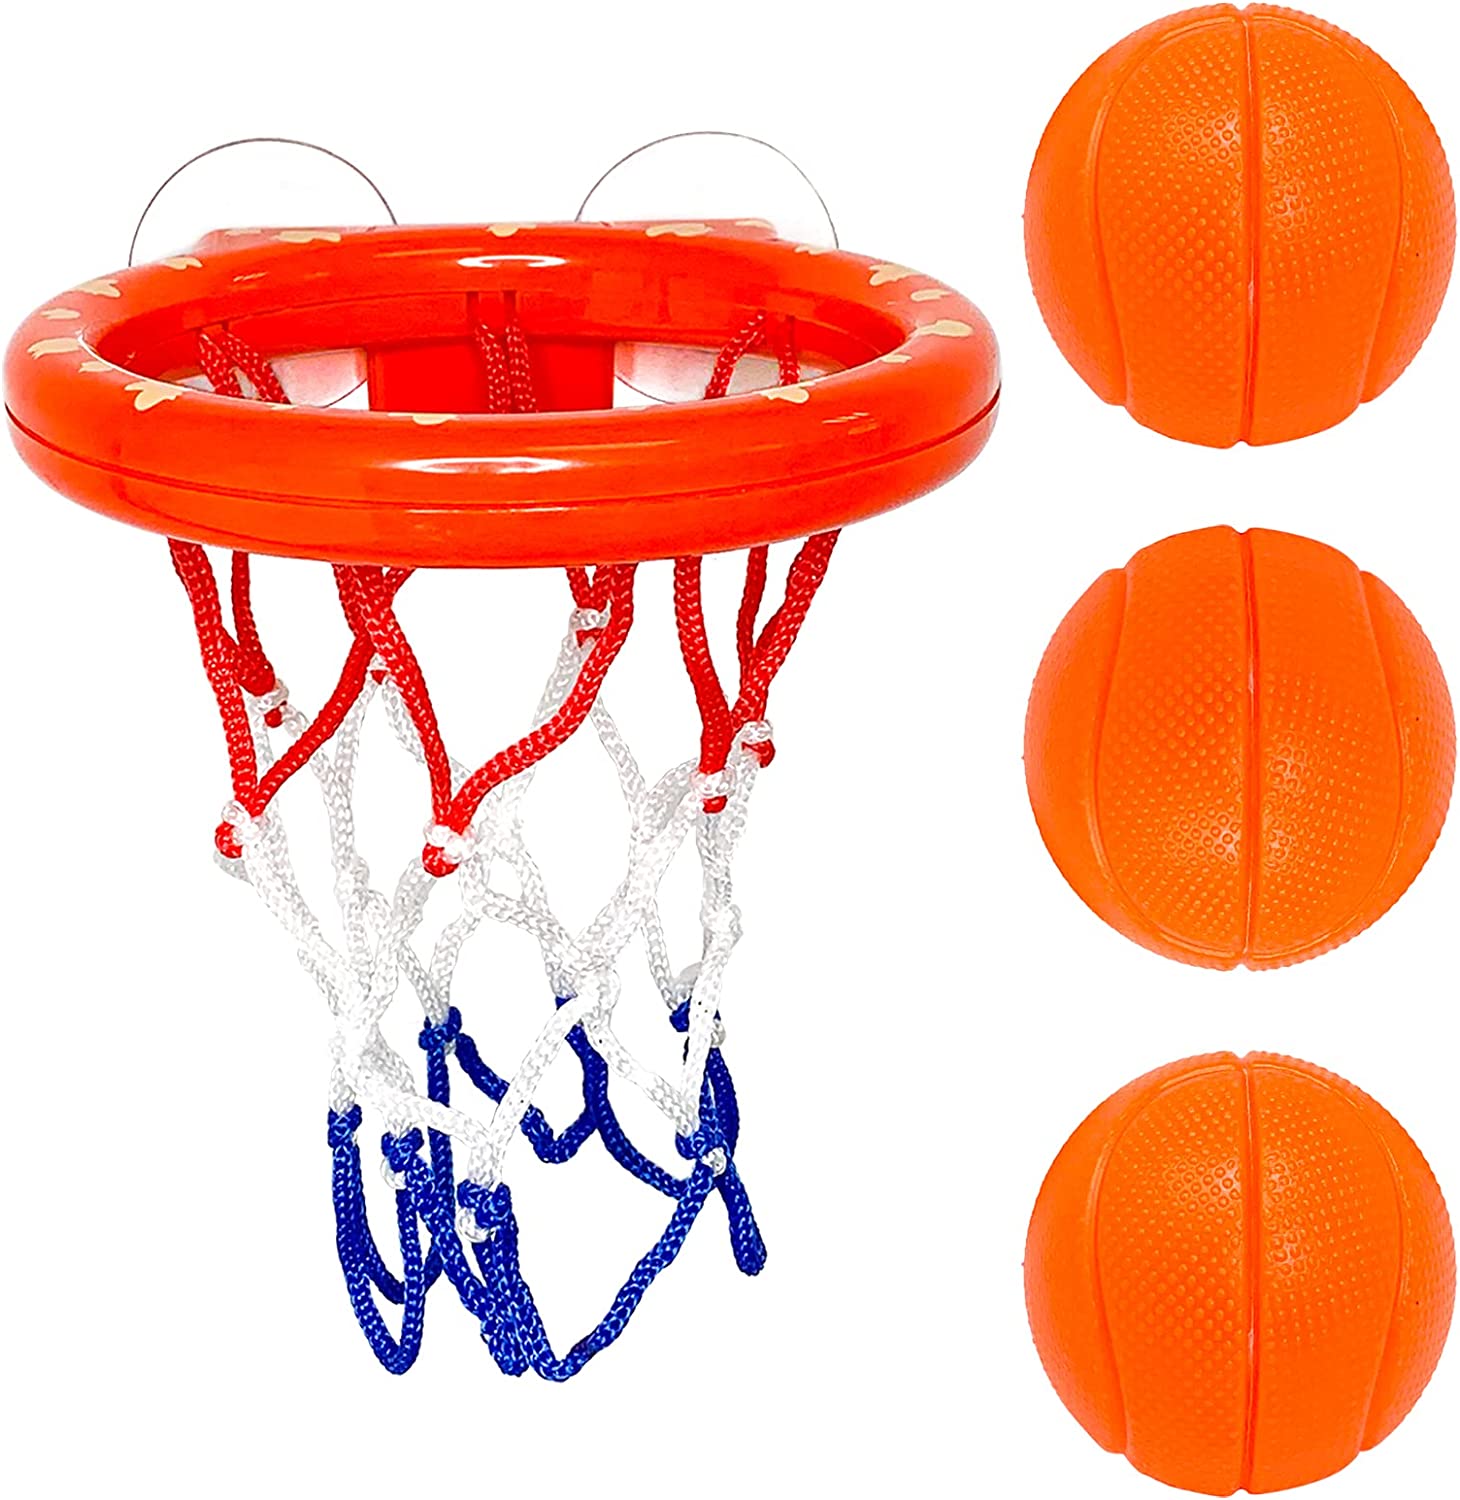 Red, white, and blue basketball hoop with three orange basketballs. 